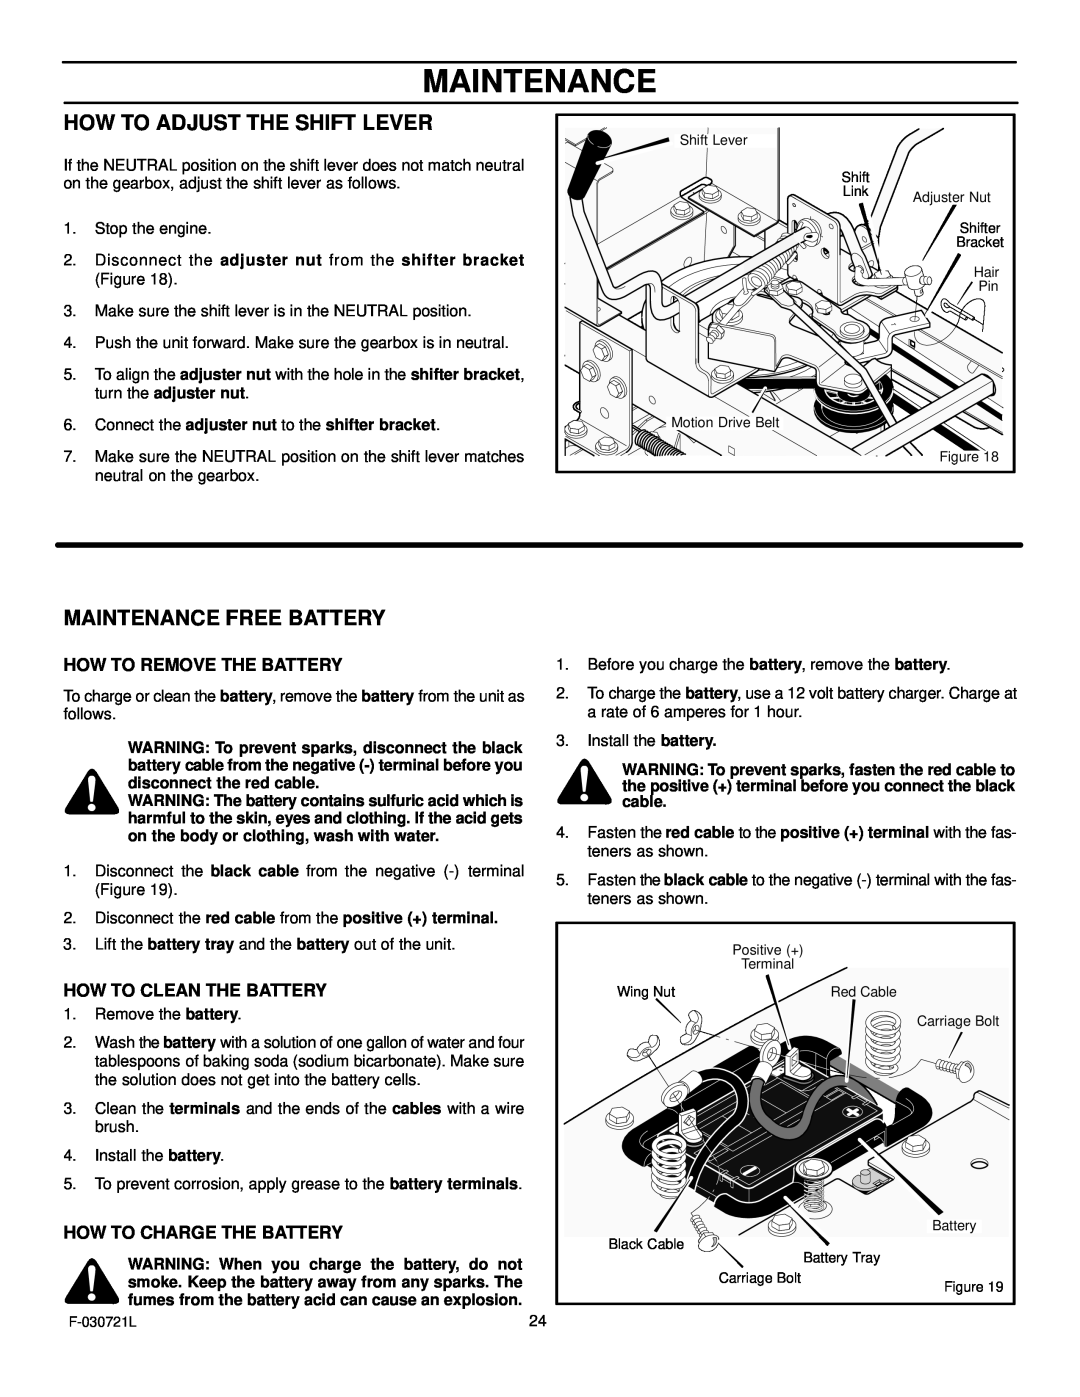 Murray 425007x92B manual How To Adjust The Shift Lever, Maintenance Free Battery, How To Remove The Battery 